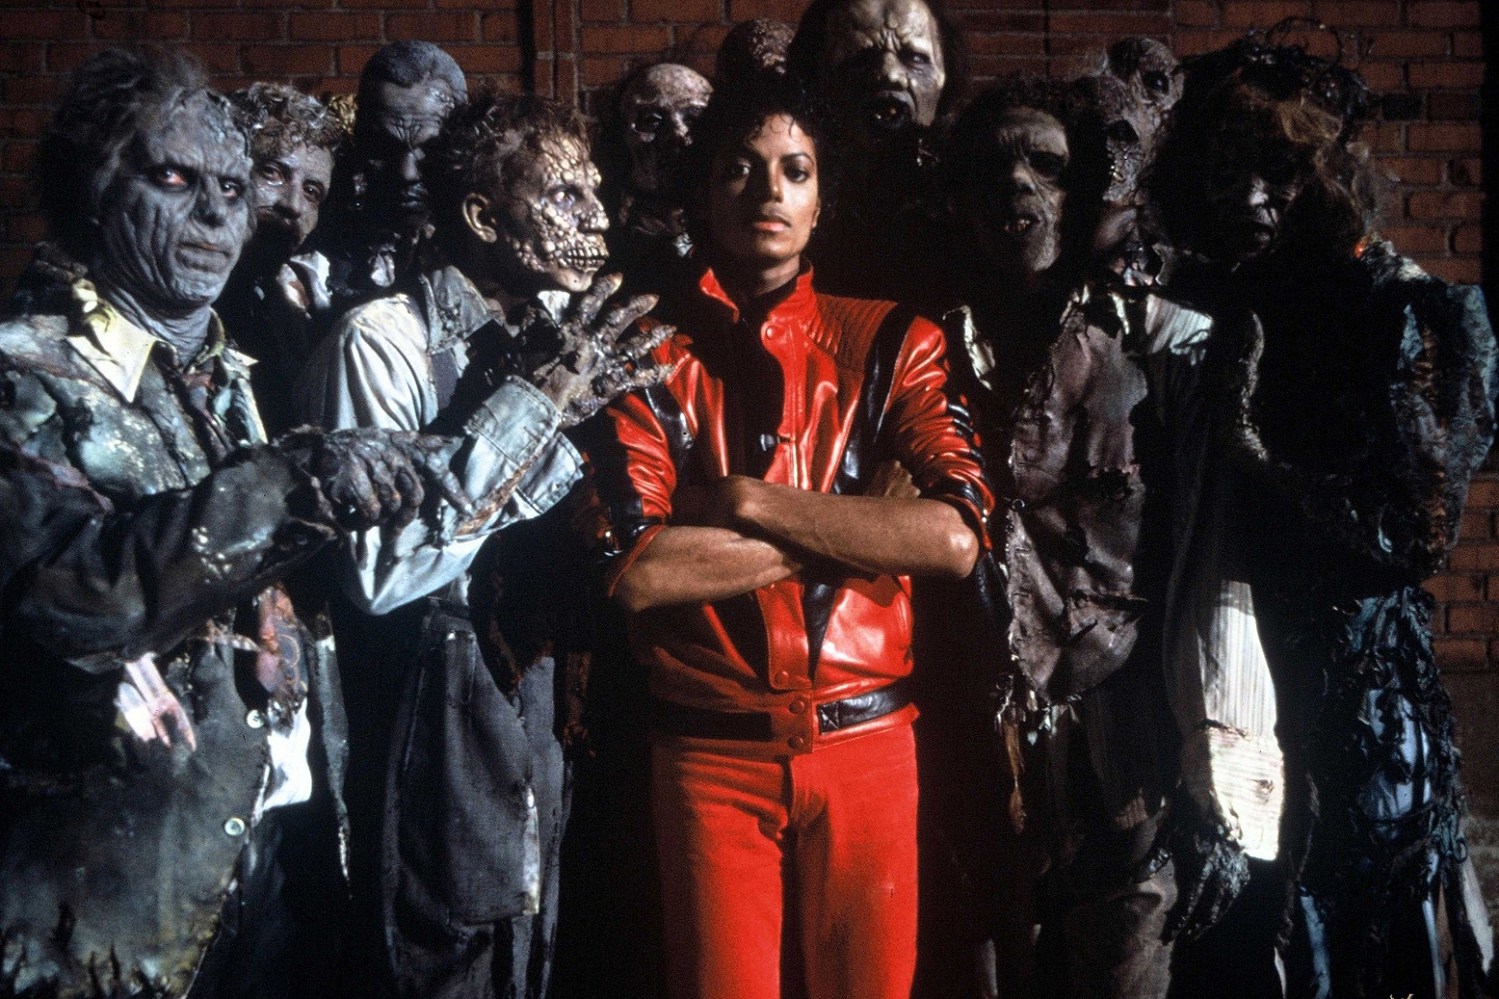 Michael Jackson’s 'Thriller' Re-enters the Billboard Charts